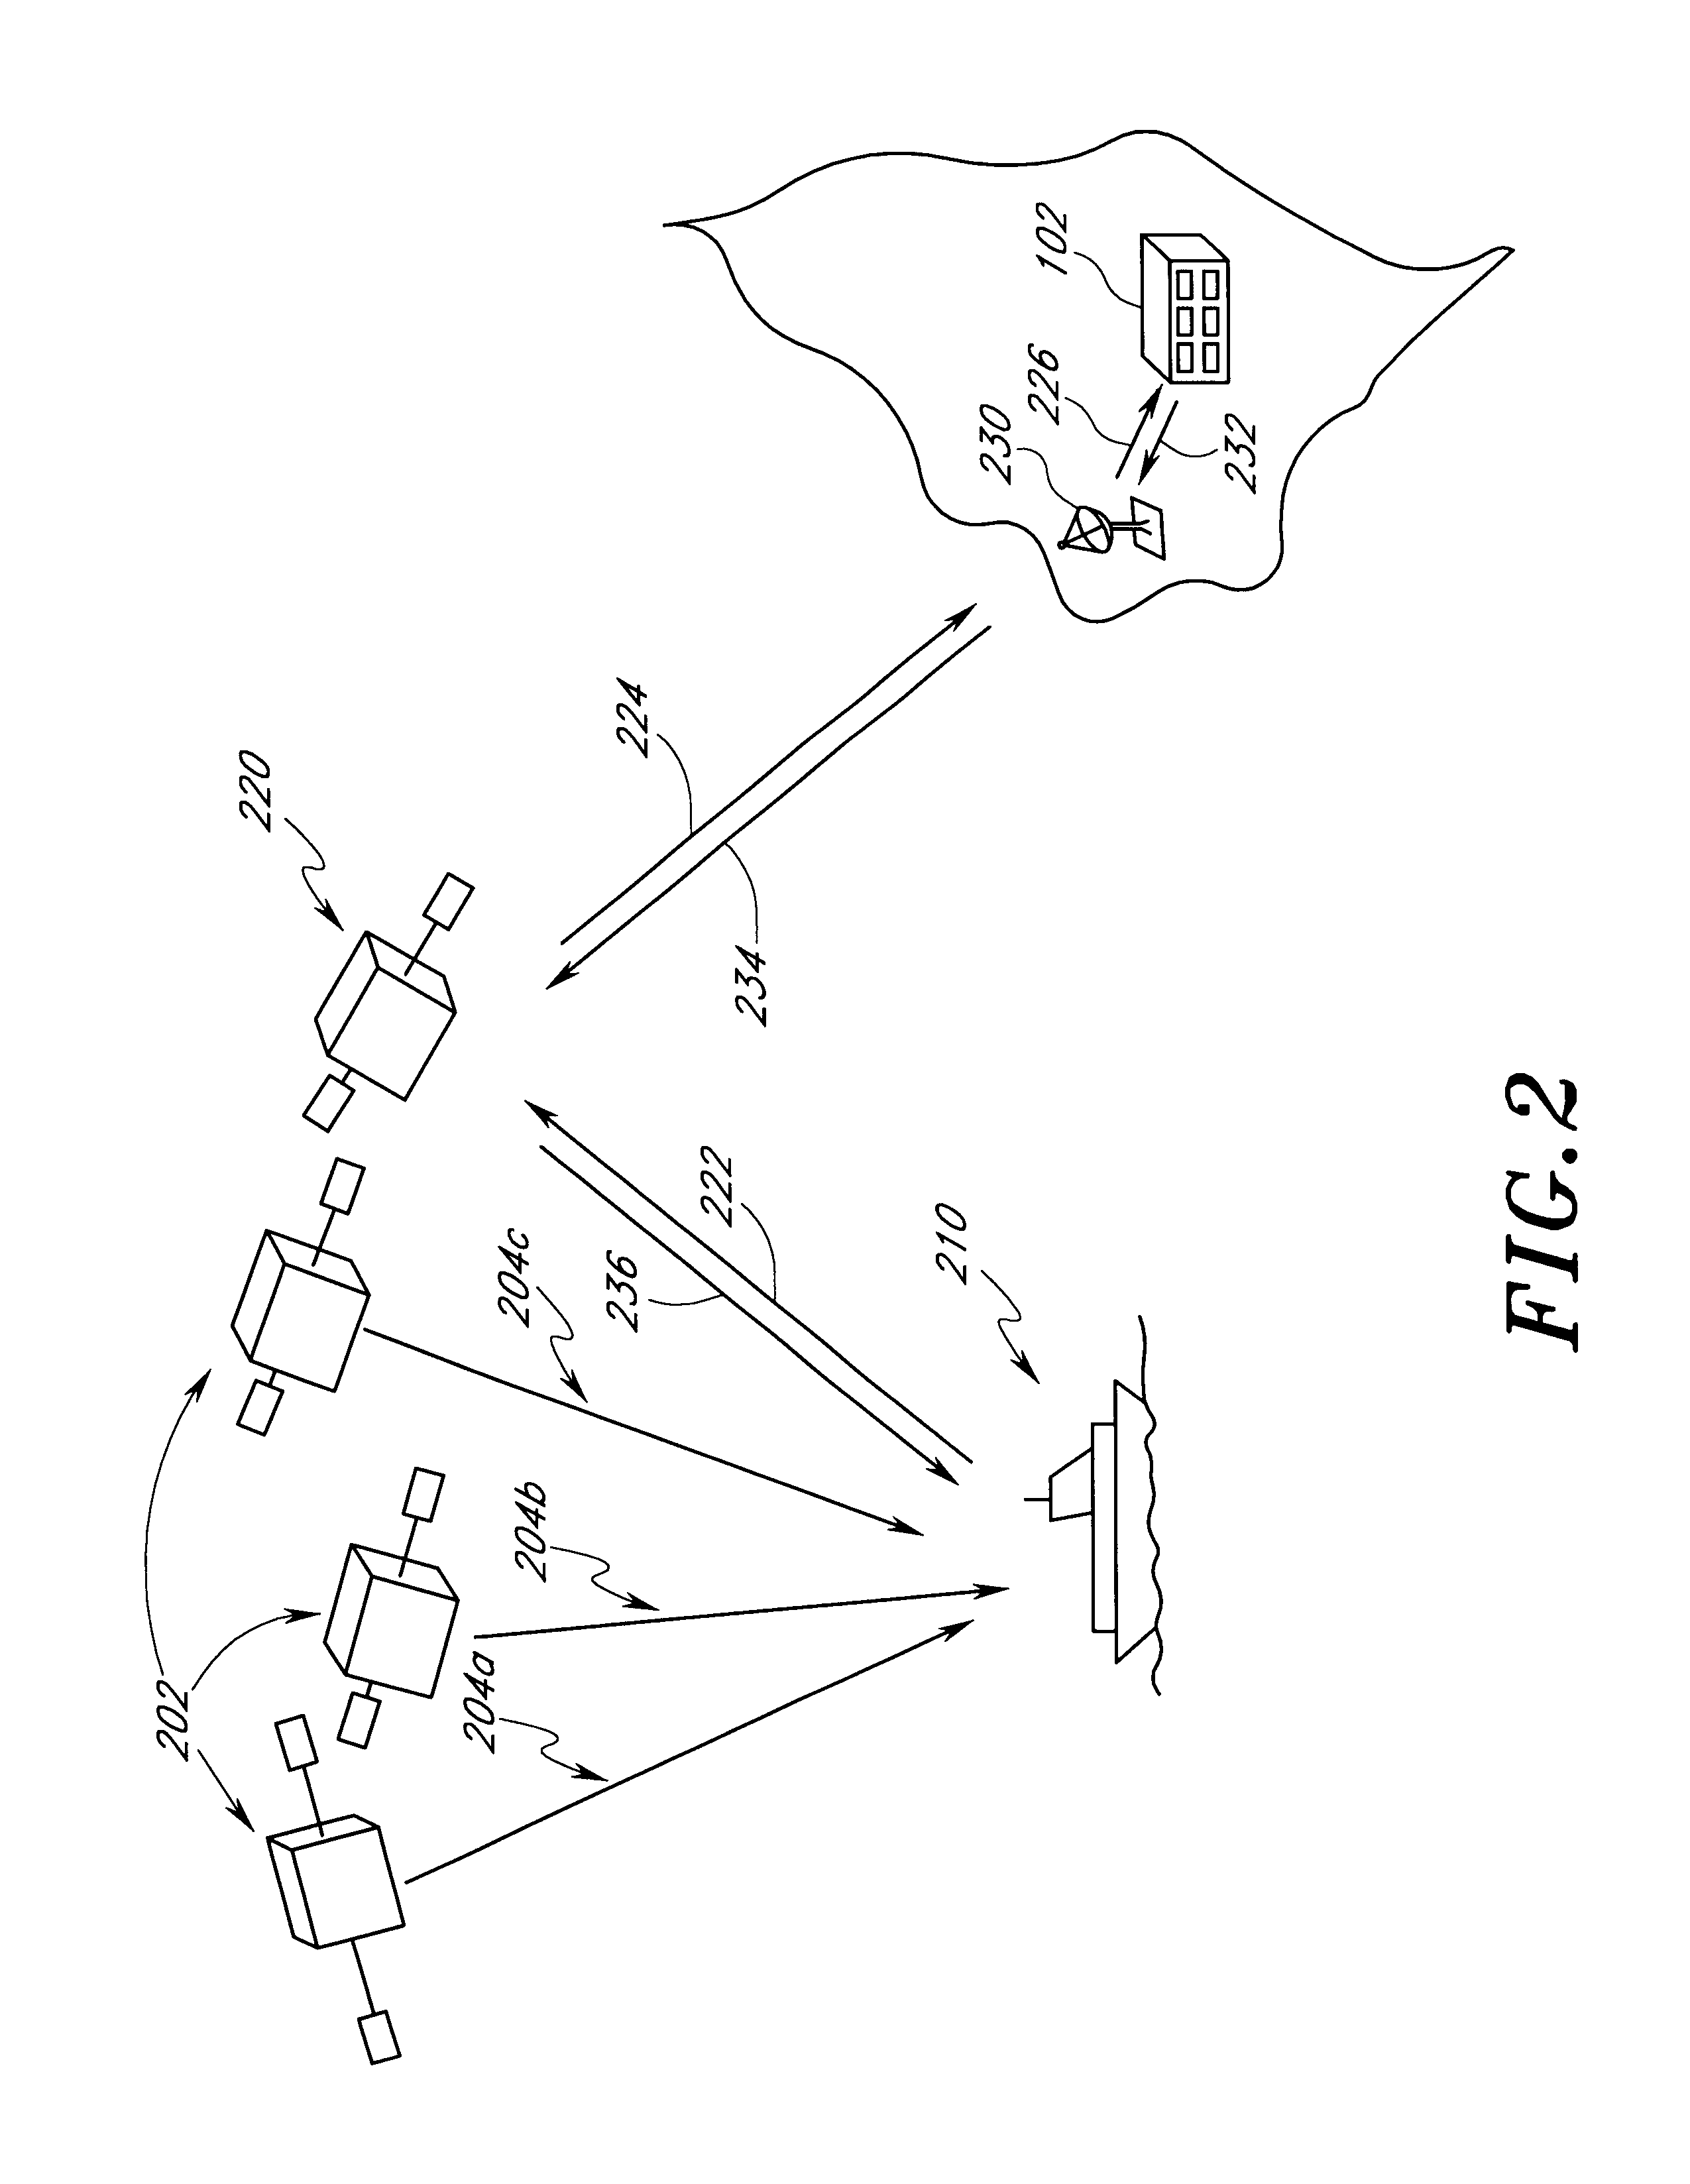 Method and system for marine vessel tracking system